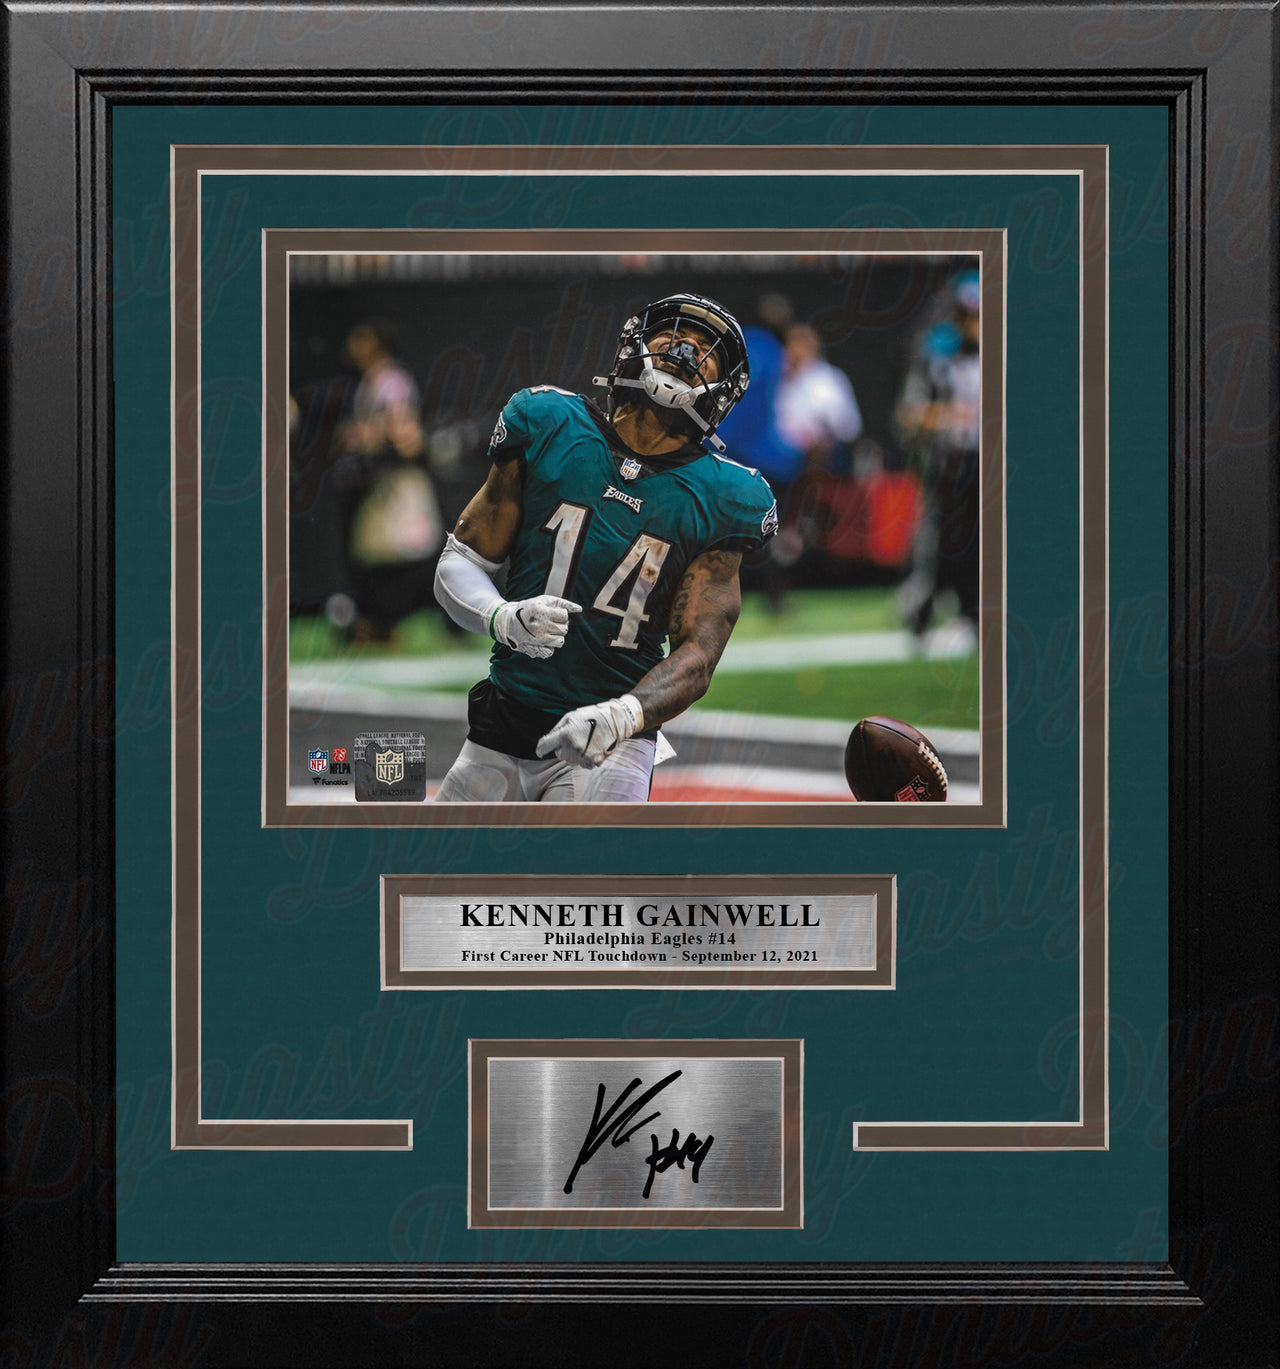 Kenneth Gainwell First NFL Touchdown Philadelphia Eagles 8x10 Framed Photo with Engraved Autograph